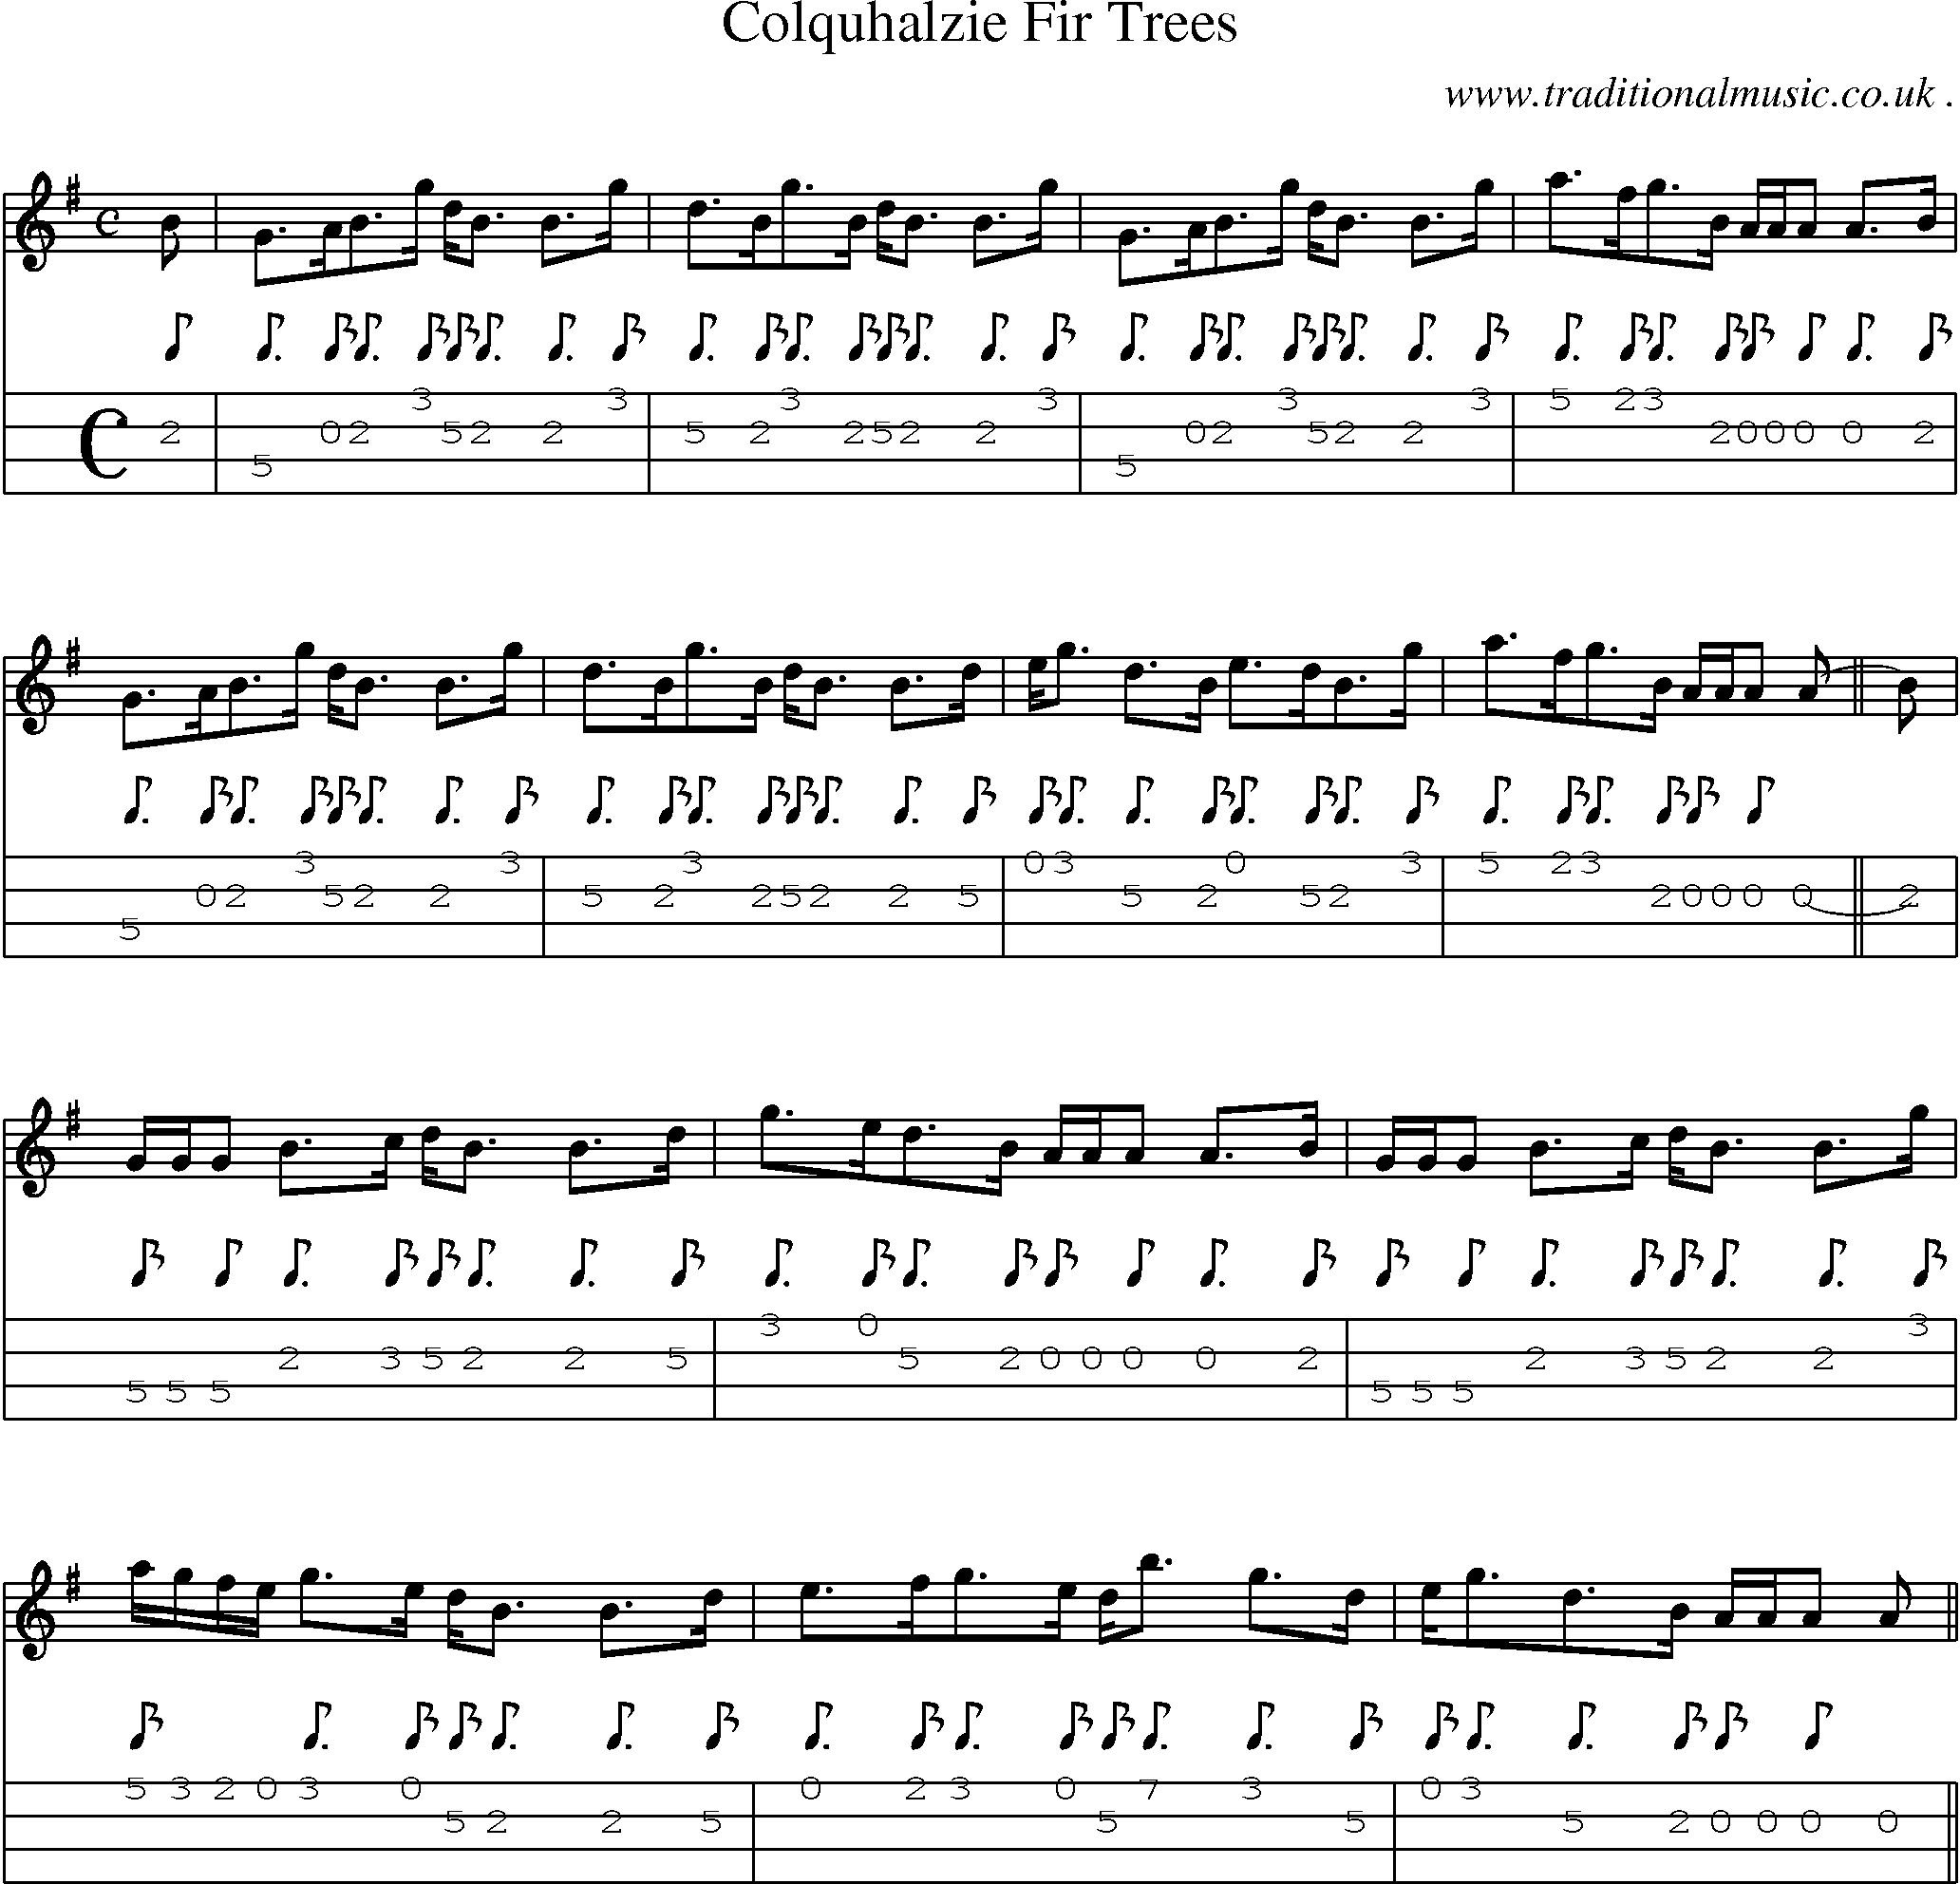 Sheet-music  score, Chords and Mandolin Tabs for Colquhalzie Fir Trees